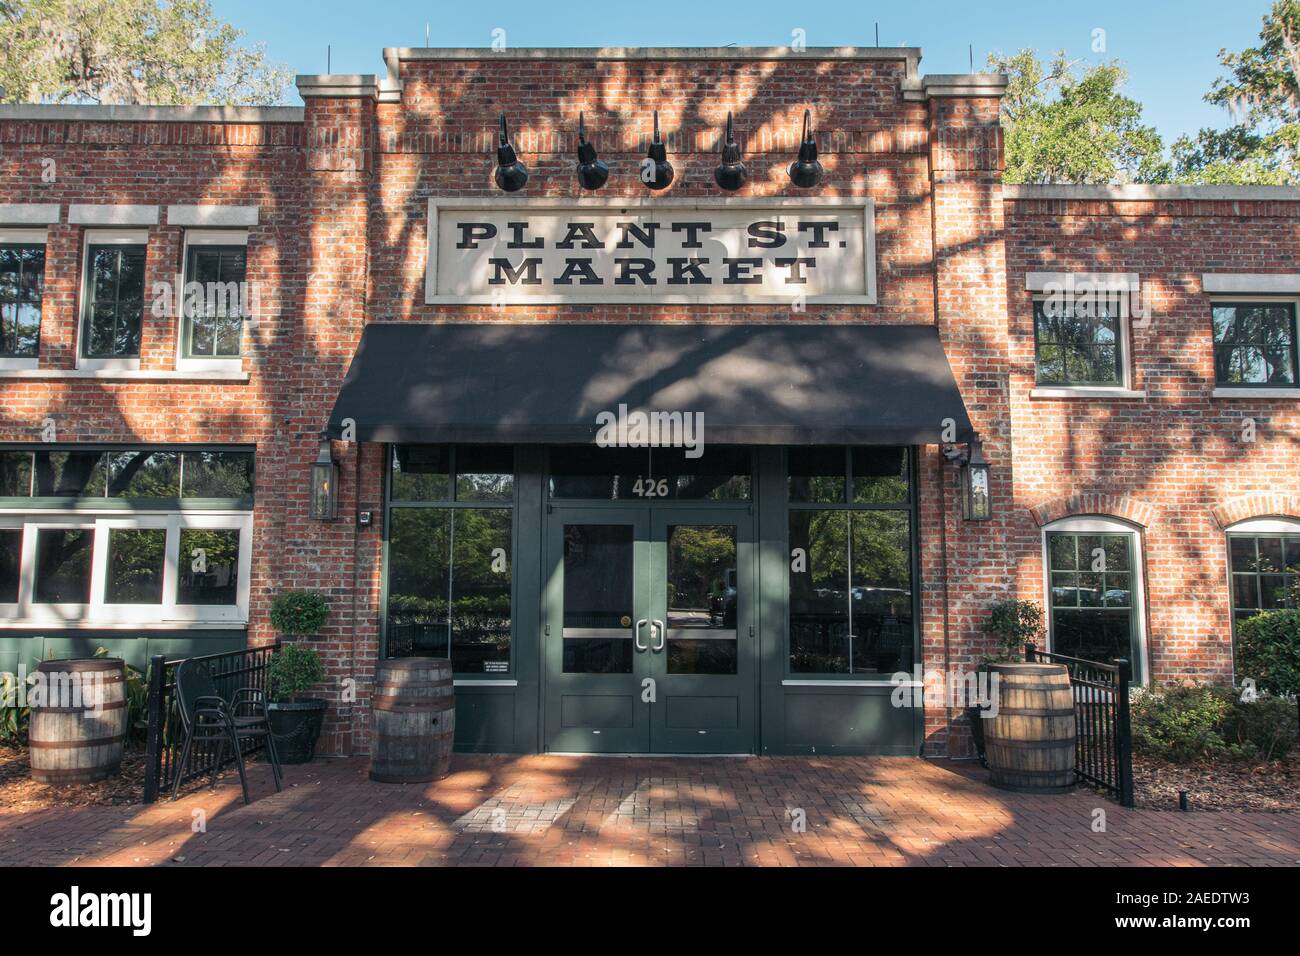 Winter Garden Florida May 29 2019 Plant Street Market A Brick Building Featuring Local Organic Food Vendors Craft Beer Bars And Outside Seating Stock Photo Alamy